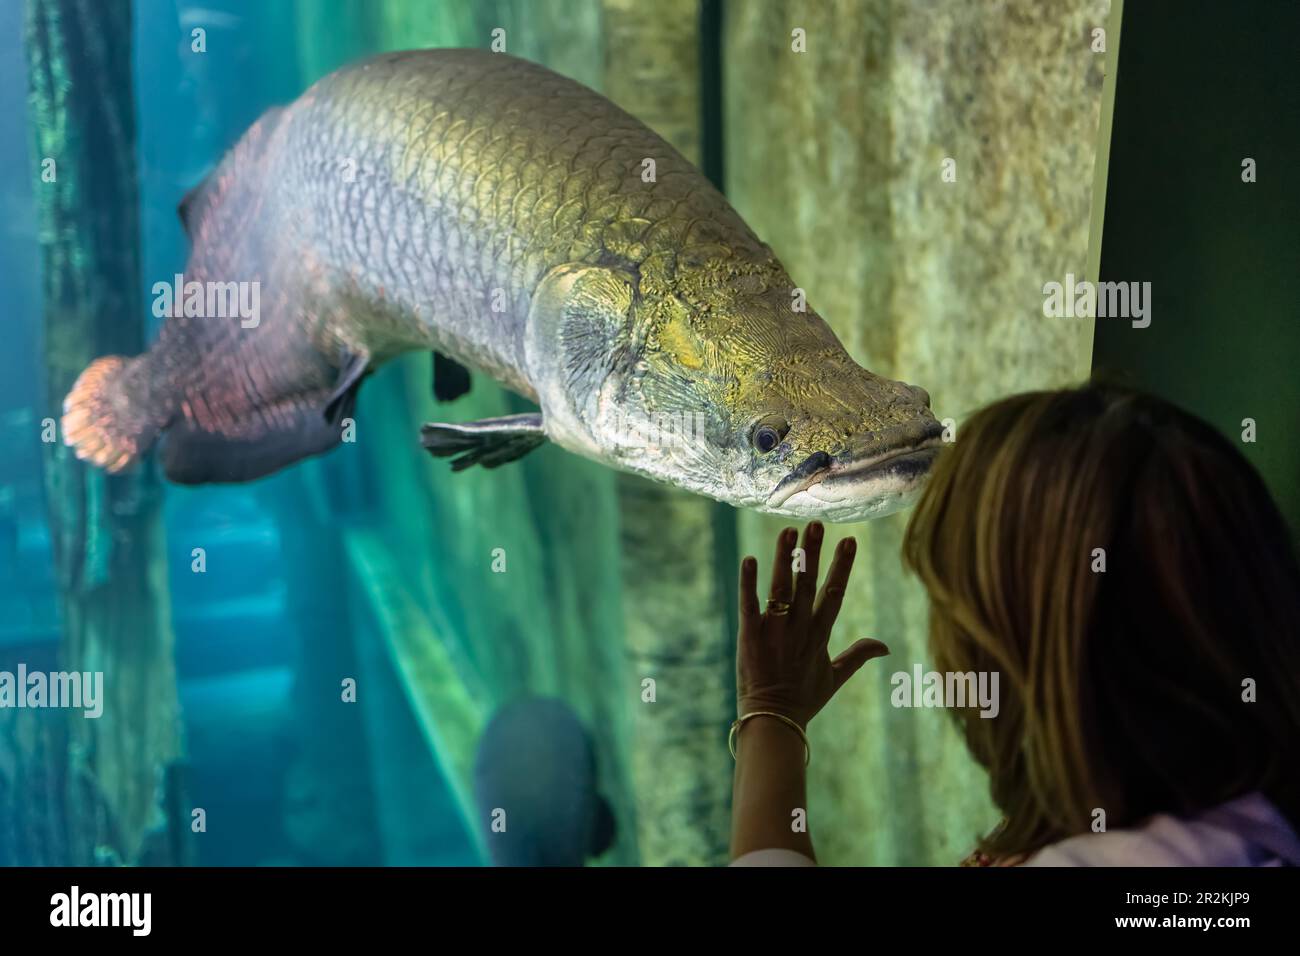 Huge catfish silurus in a fish tank looking at a tourist woman who puts her hand on the glass that separates them. Stock Photo